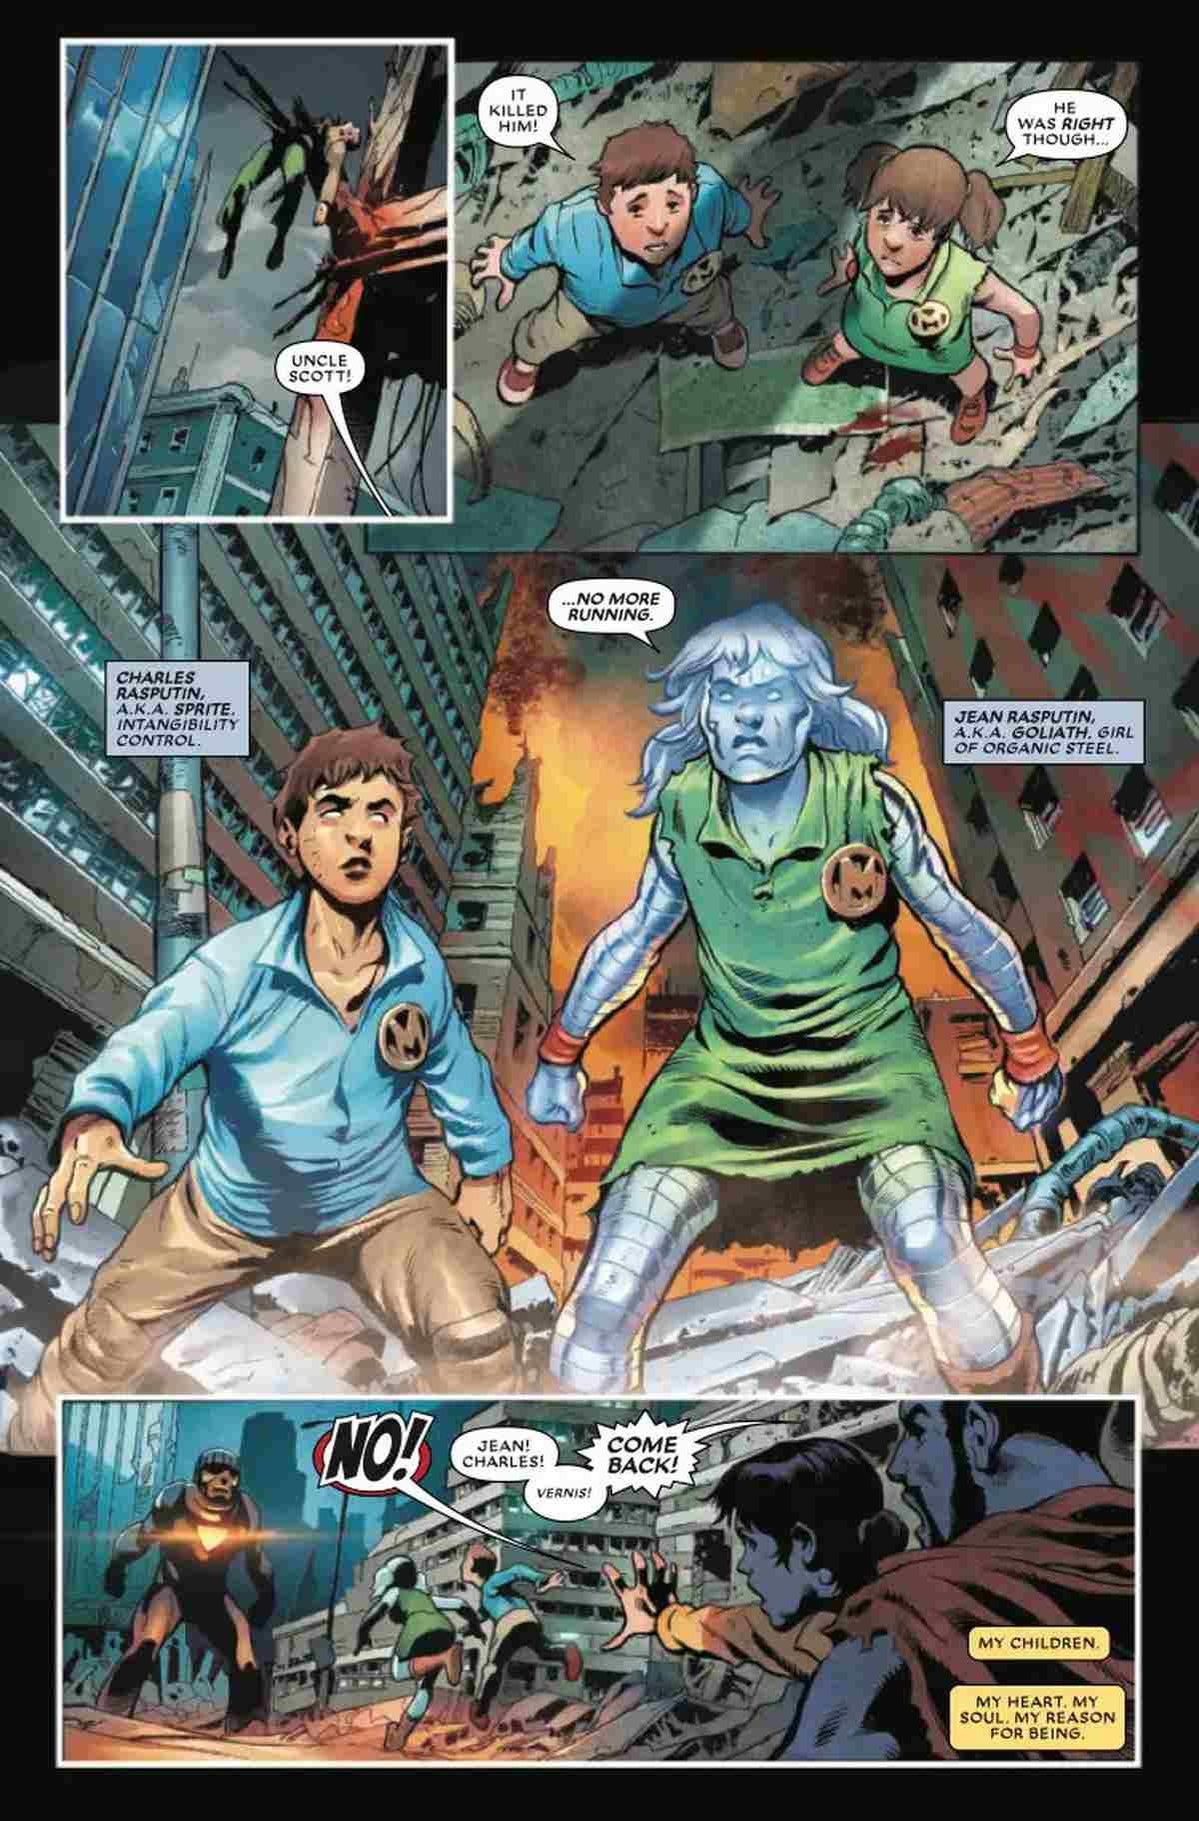 x-men-days-of-future-past-doomsday-1-preview-page-4.jpg